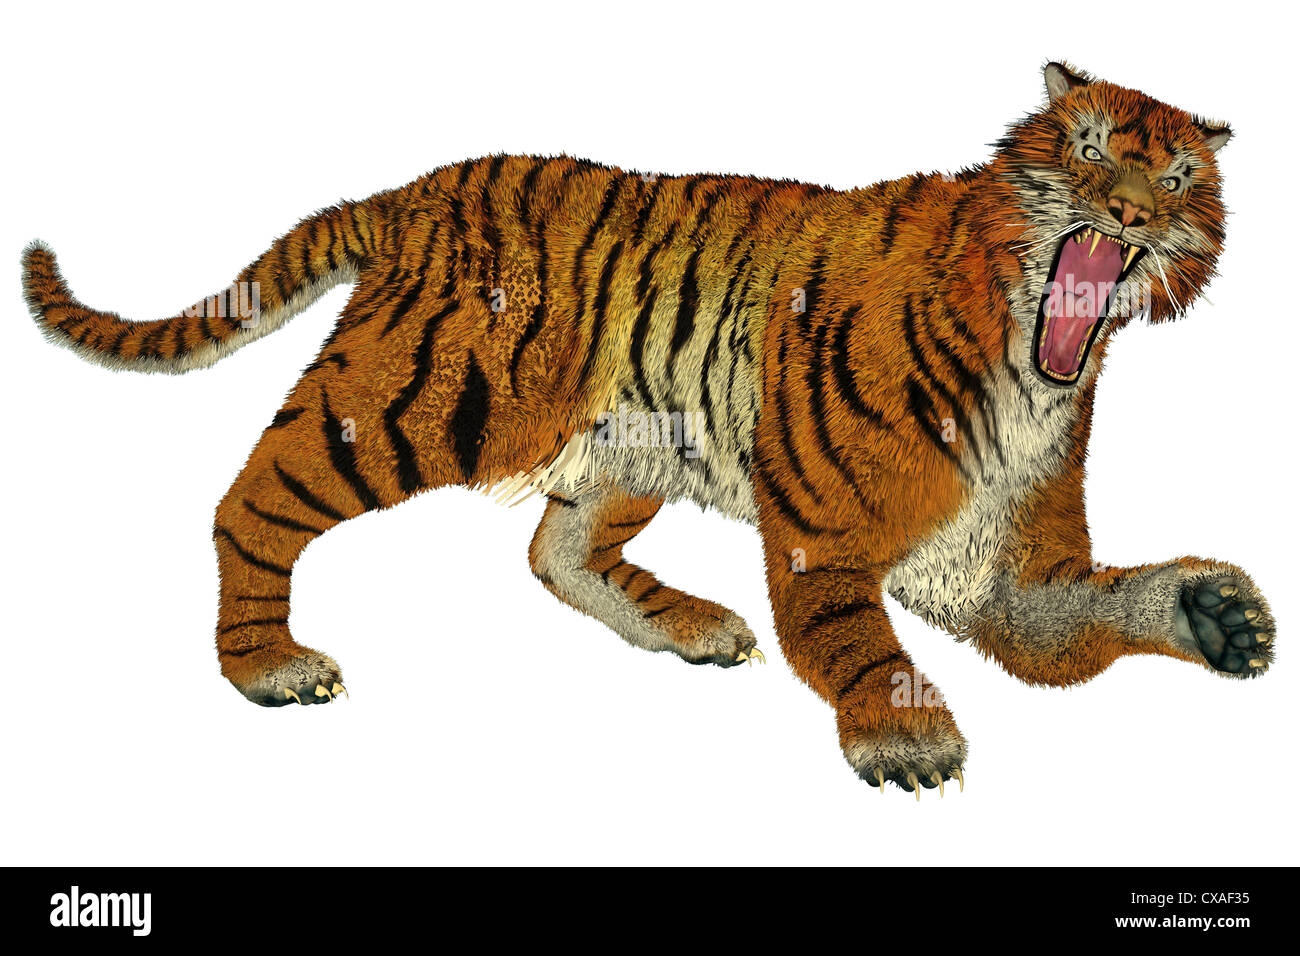 Big beautiful tiger raging in white background Stock Photo